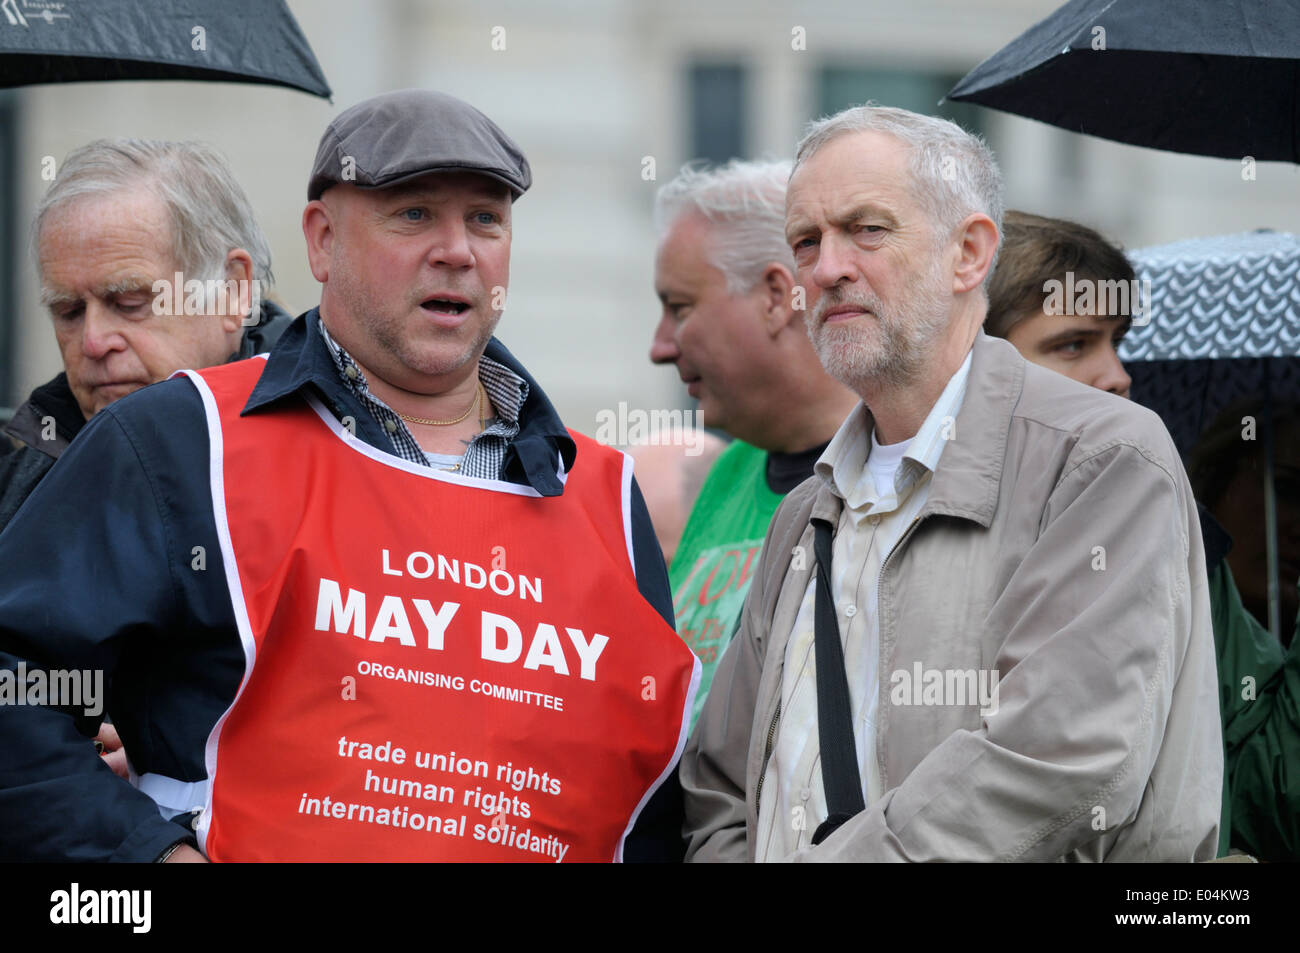 Jeremy Corbyn MP (Labour member for Islington North) and May Day Organising Committee member at the May Day rally, London 2014 Stock Photo